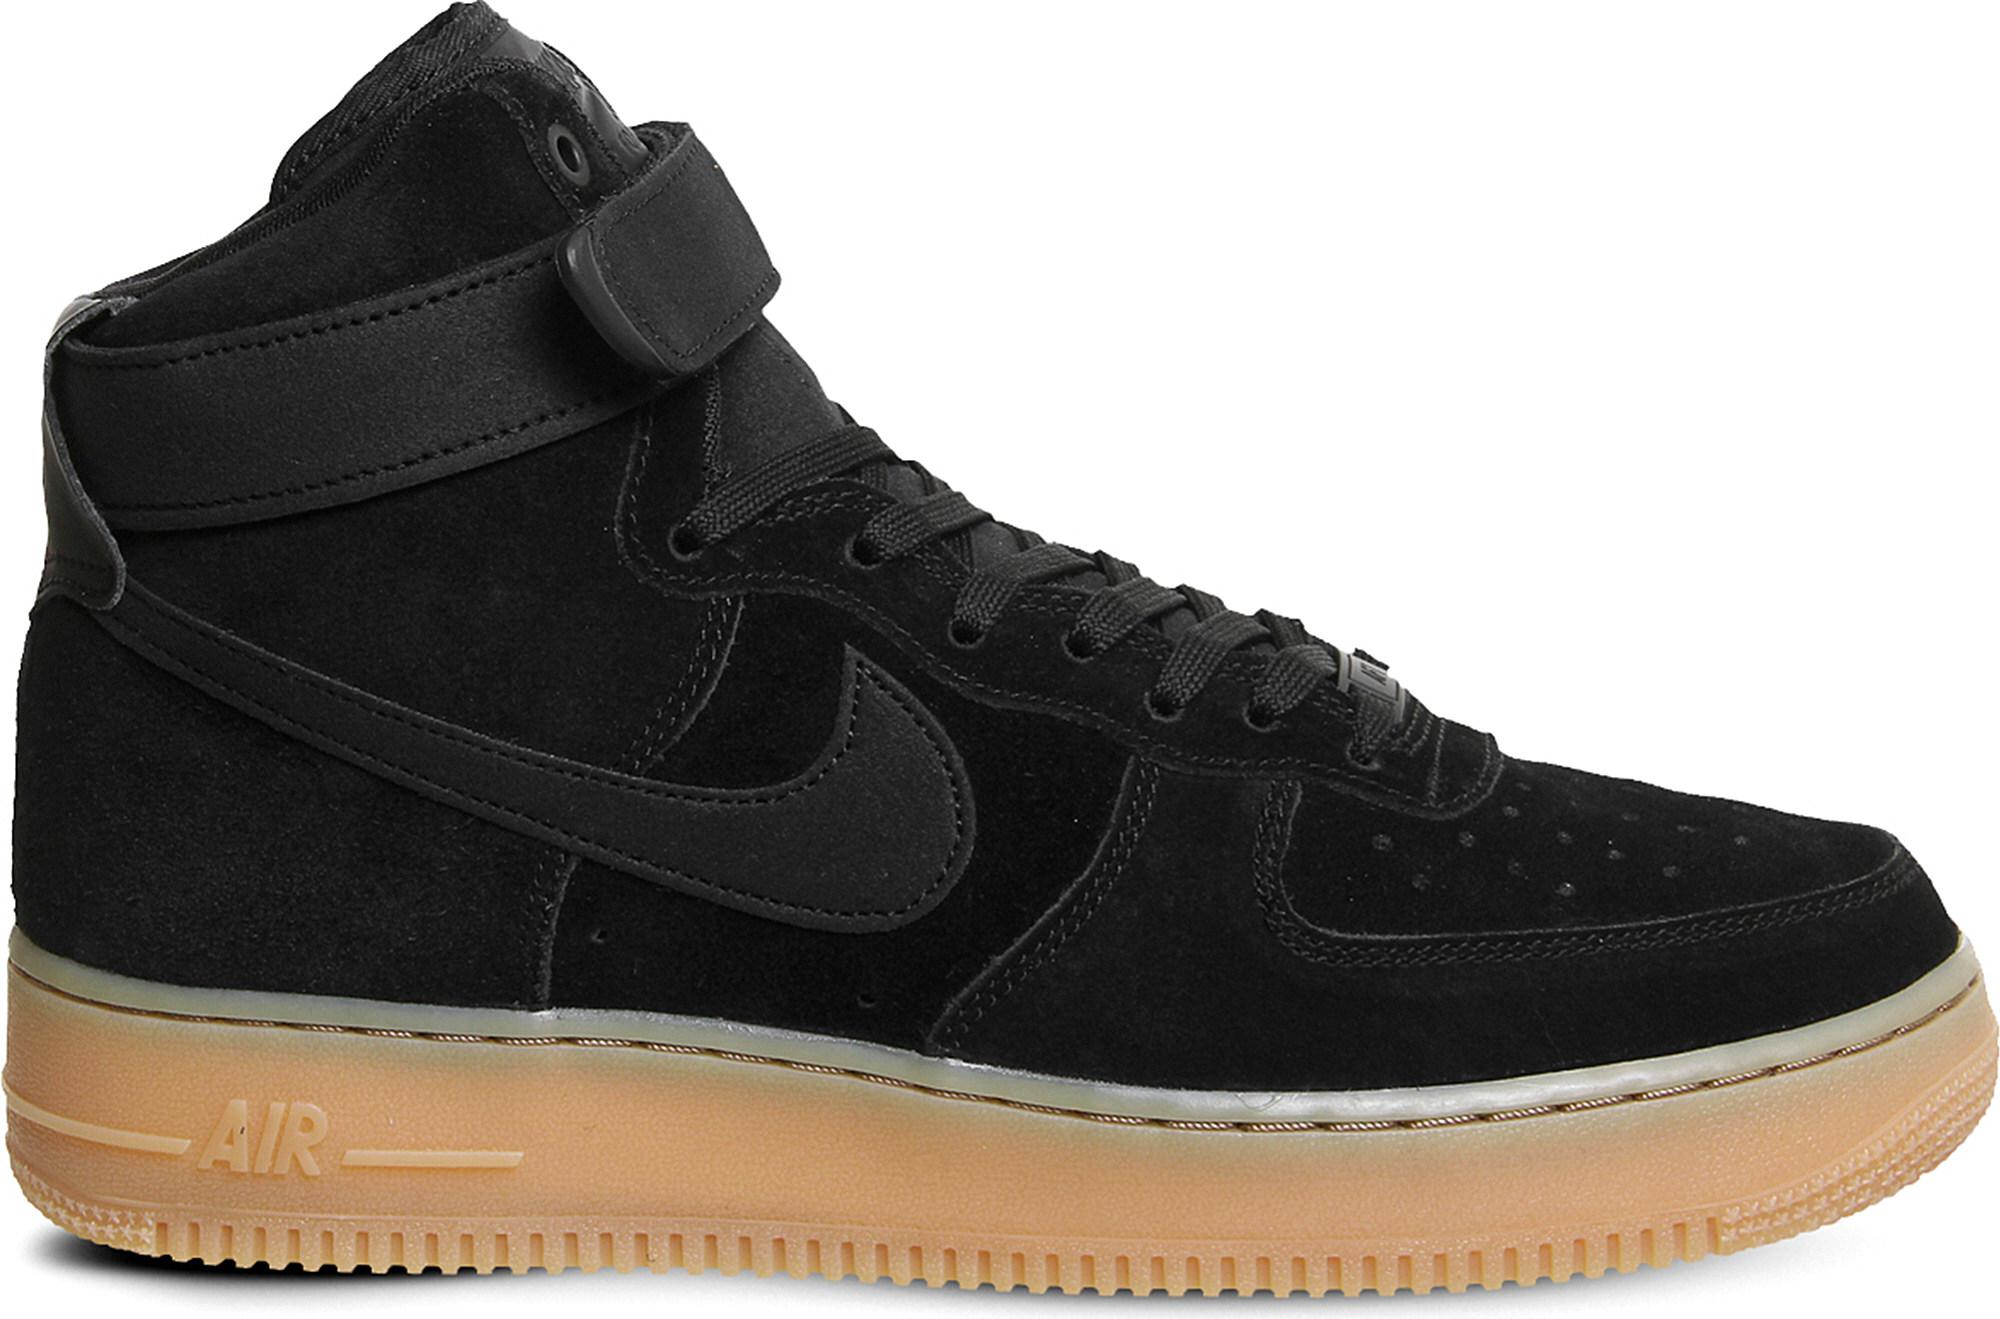 Black Nike Air Force 1 Suede - Airforce Military